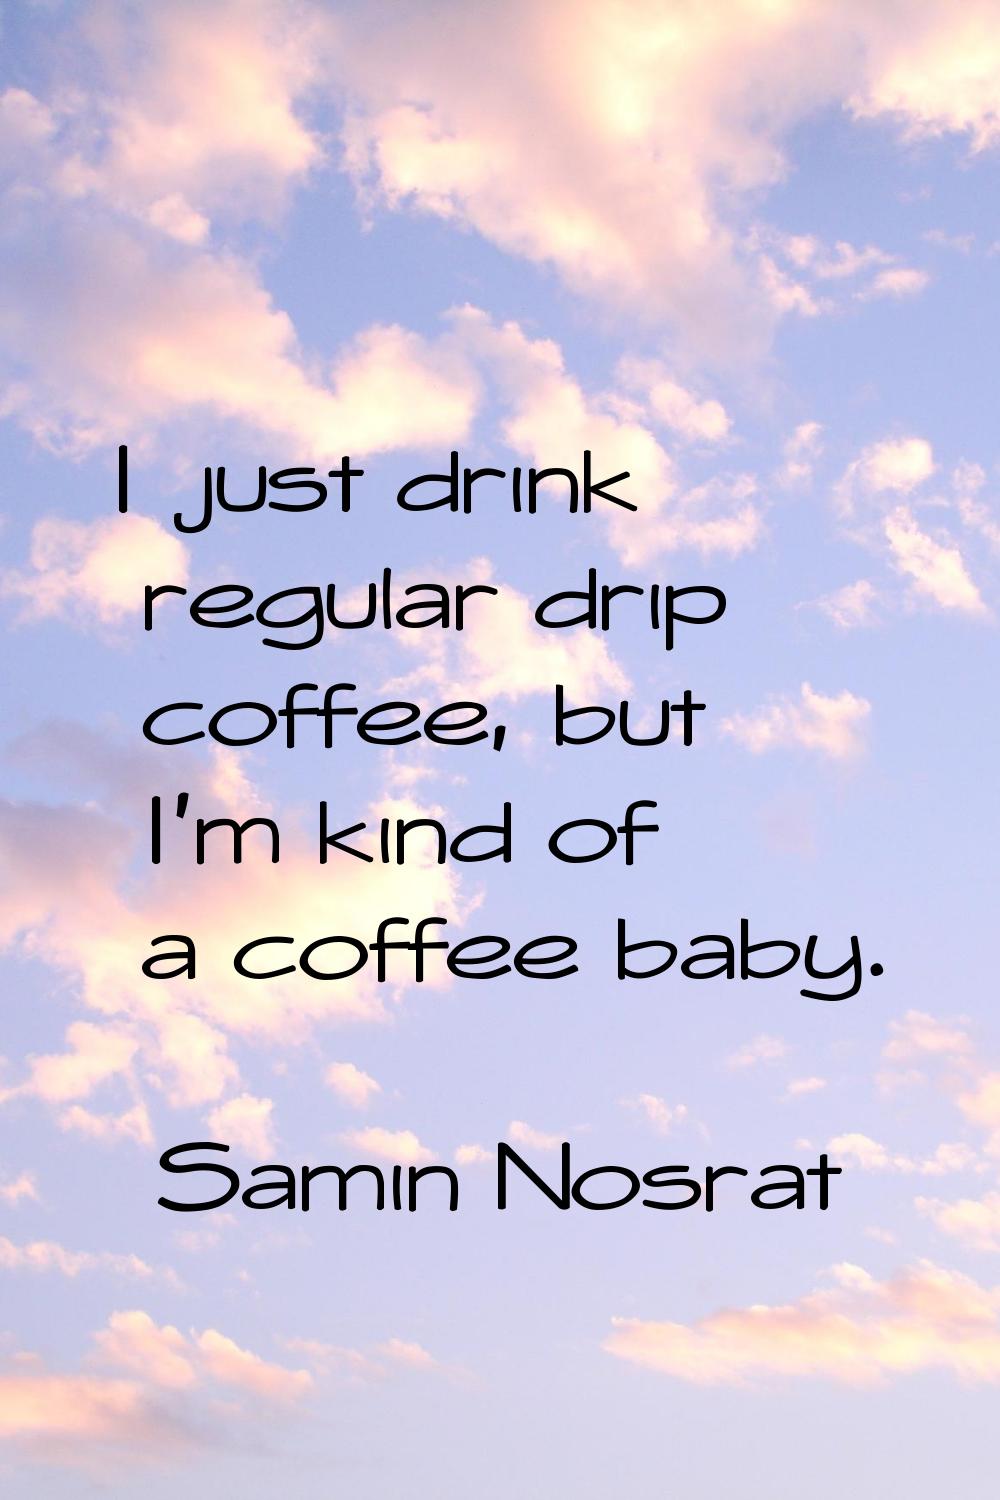 I just drink regular drip coffee, but I'm kind of a coffee baby.